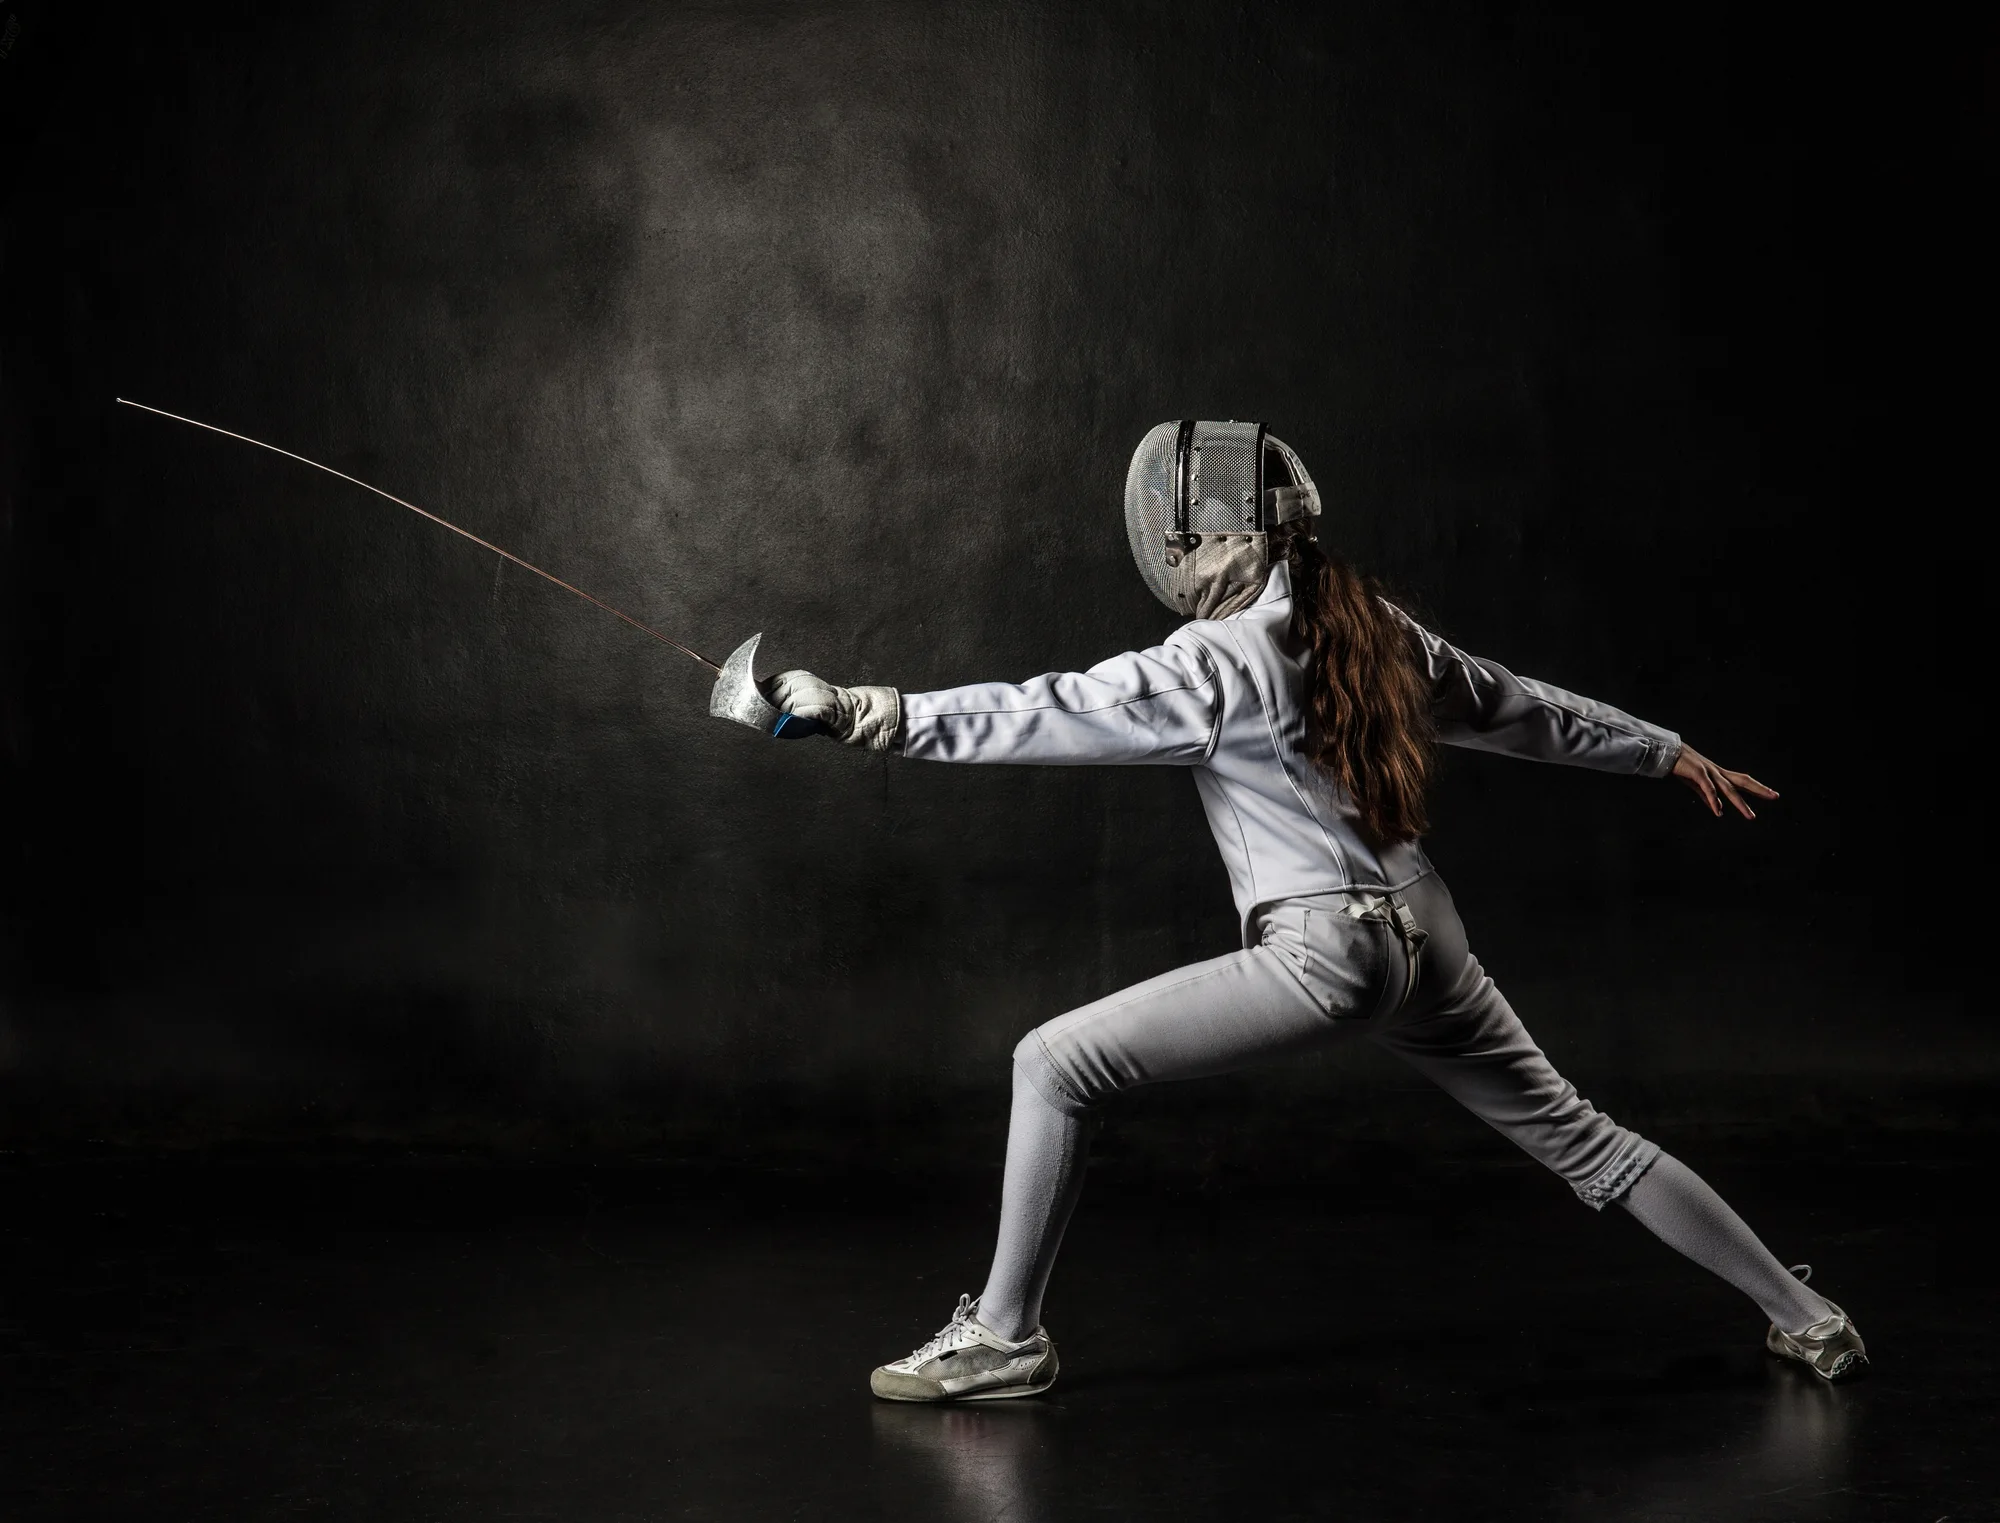 A girl with fencing costume and a fencing sabre.